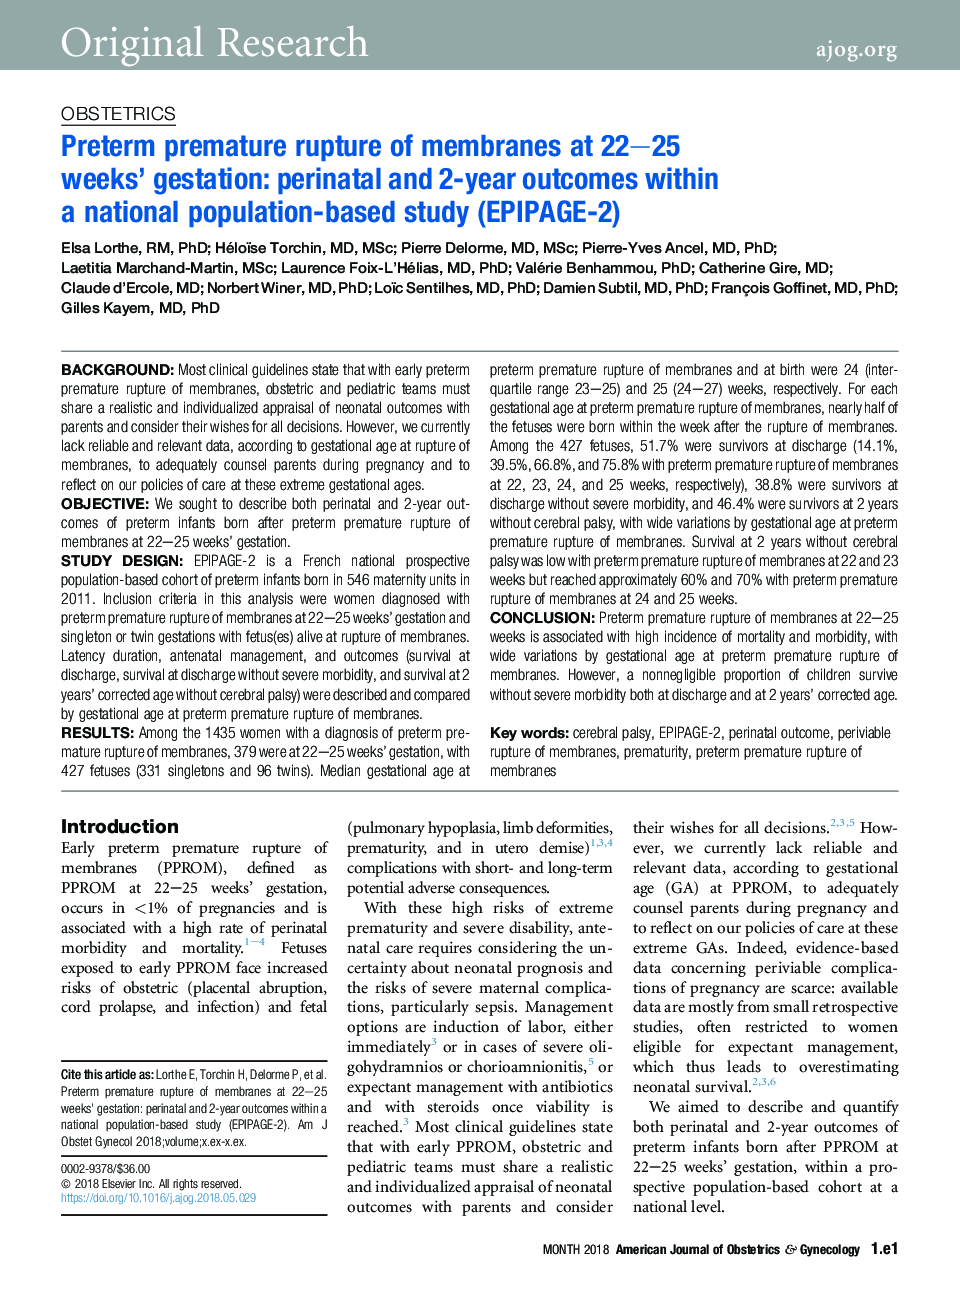 Preterm premature rupture of membranes at 22-25 weeks' gestation: perinatal and 2-year outcomes within a national population-based study (EPIPAGE-2)